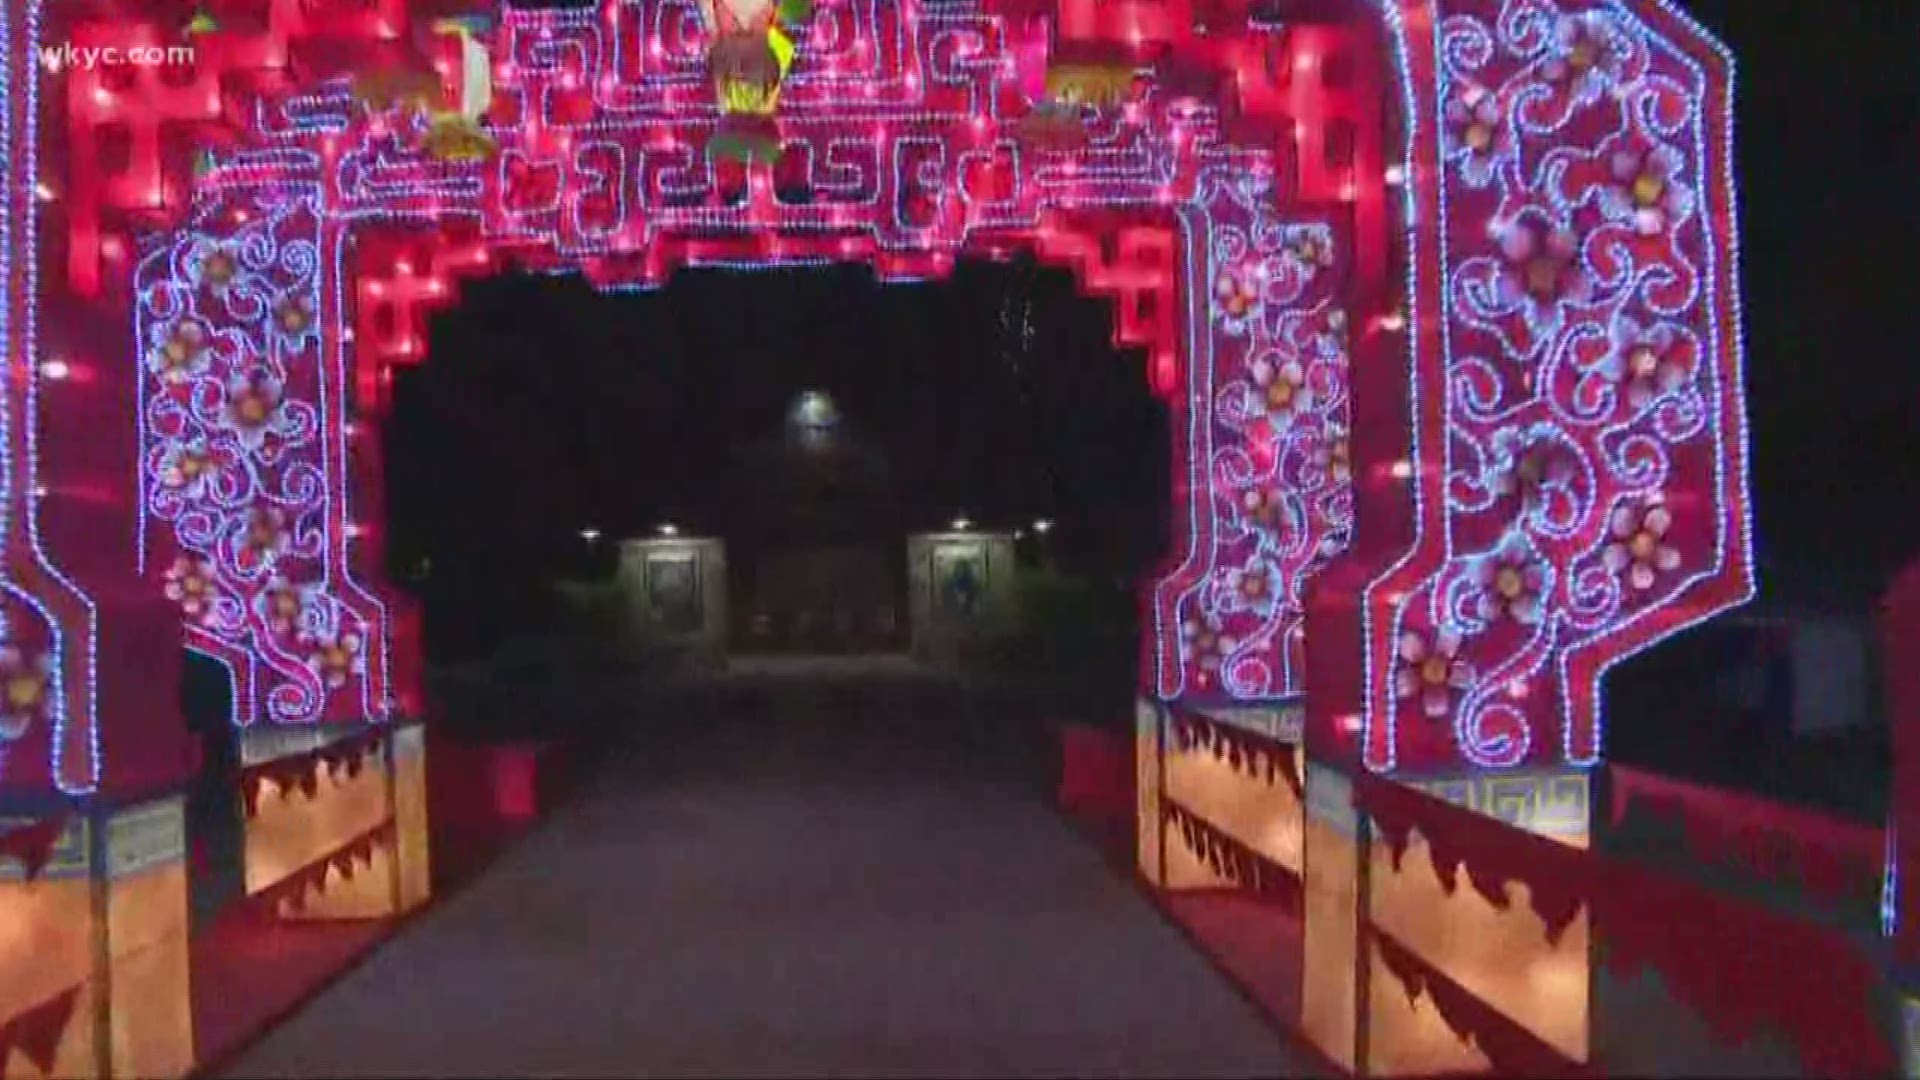 The Cleveland Metroparks Zoo has announced that it will extend the popular Asian Lantern Festival by an extra two weeks. The final day will be Aug. 11.